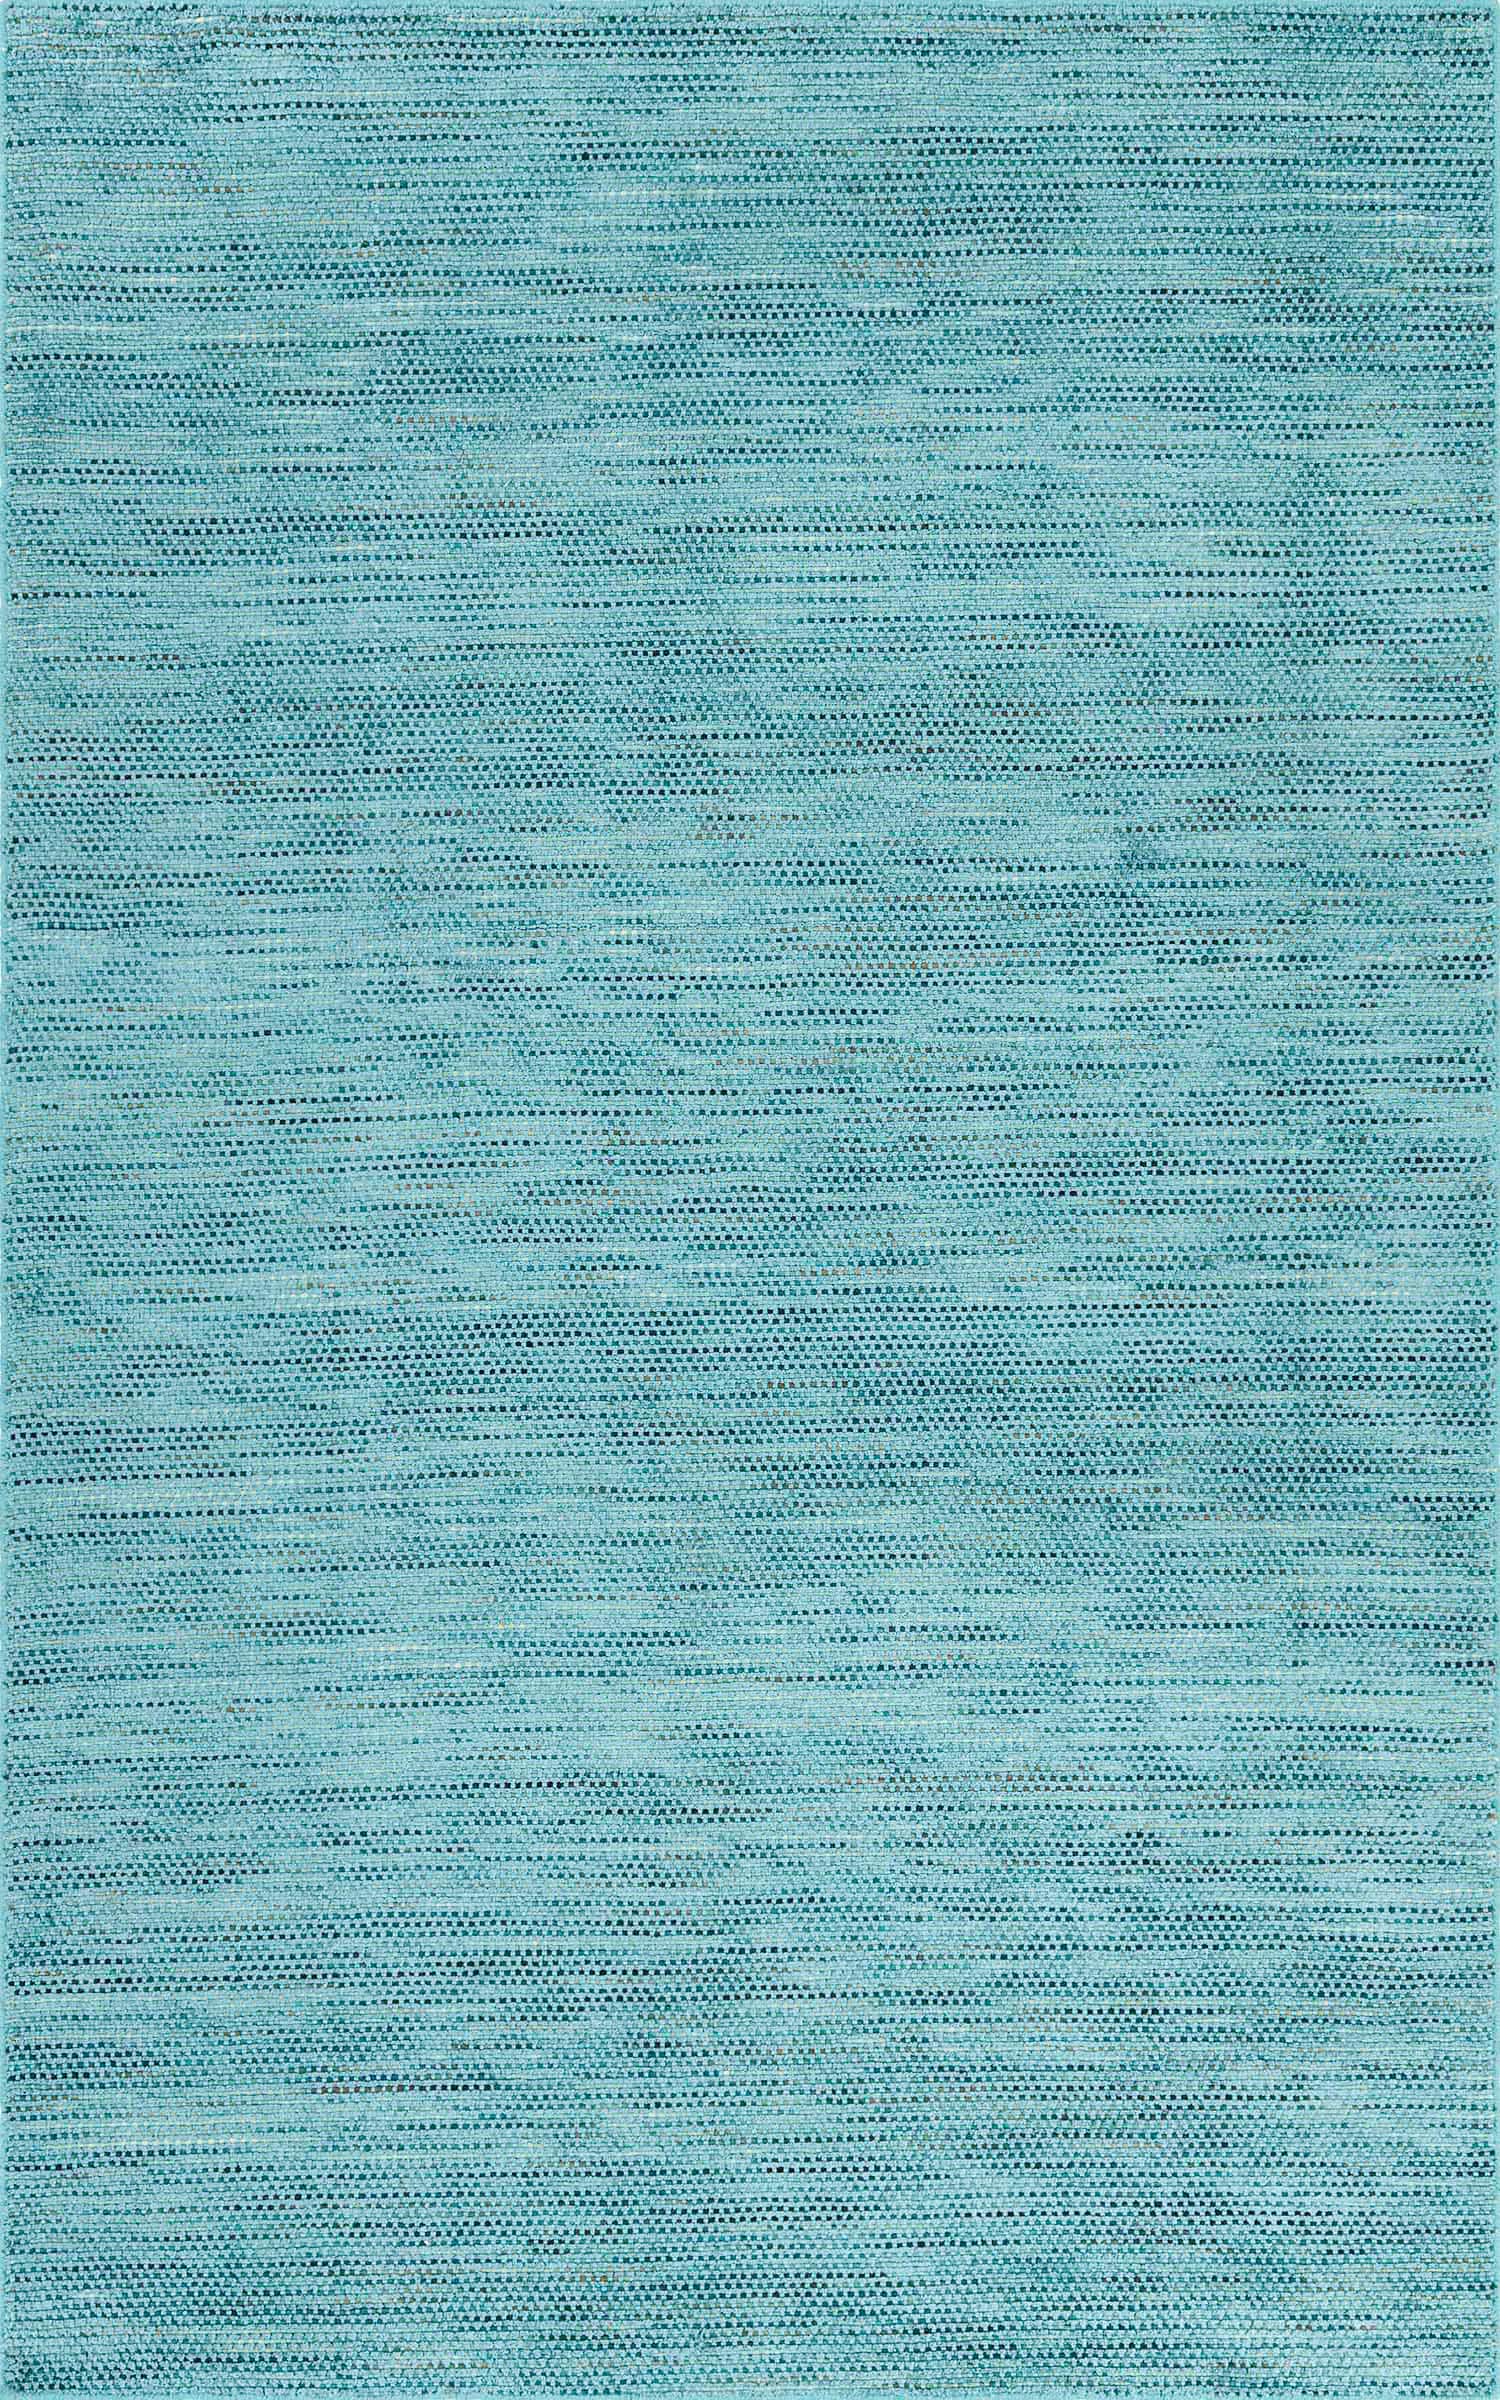 Addison Rugs Winslow Active Solid Peacock 8' x 10' Area Rug